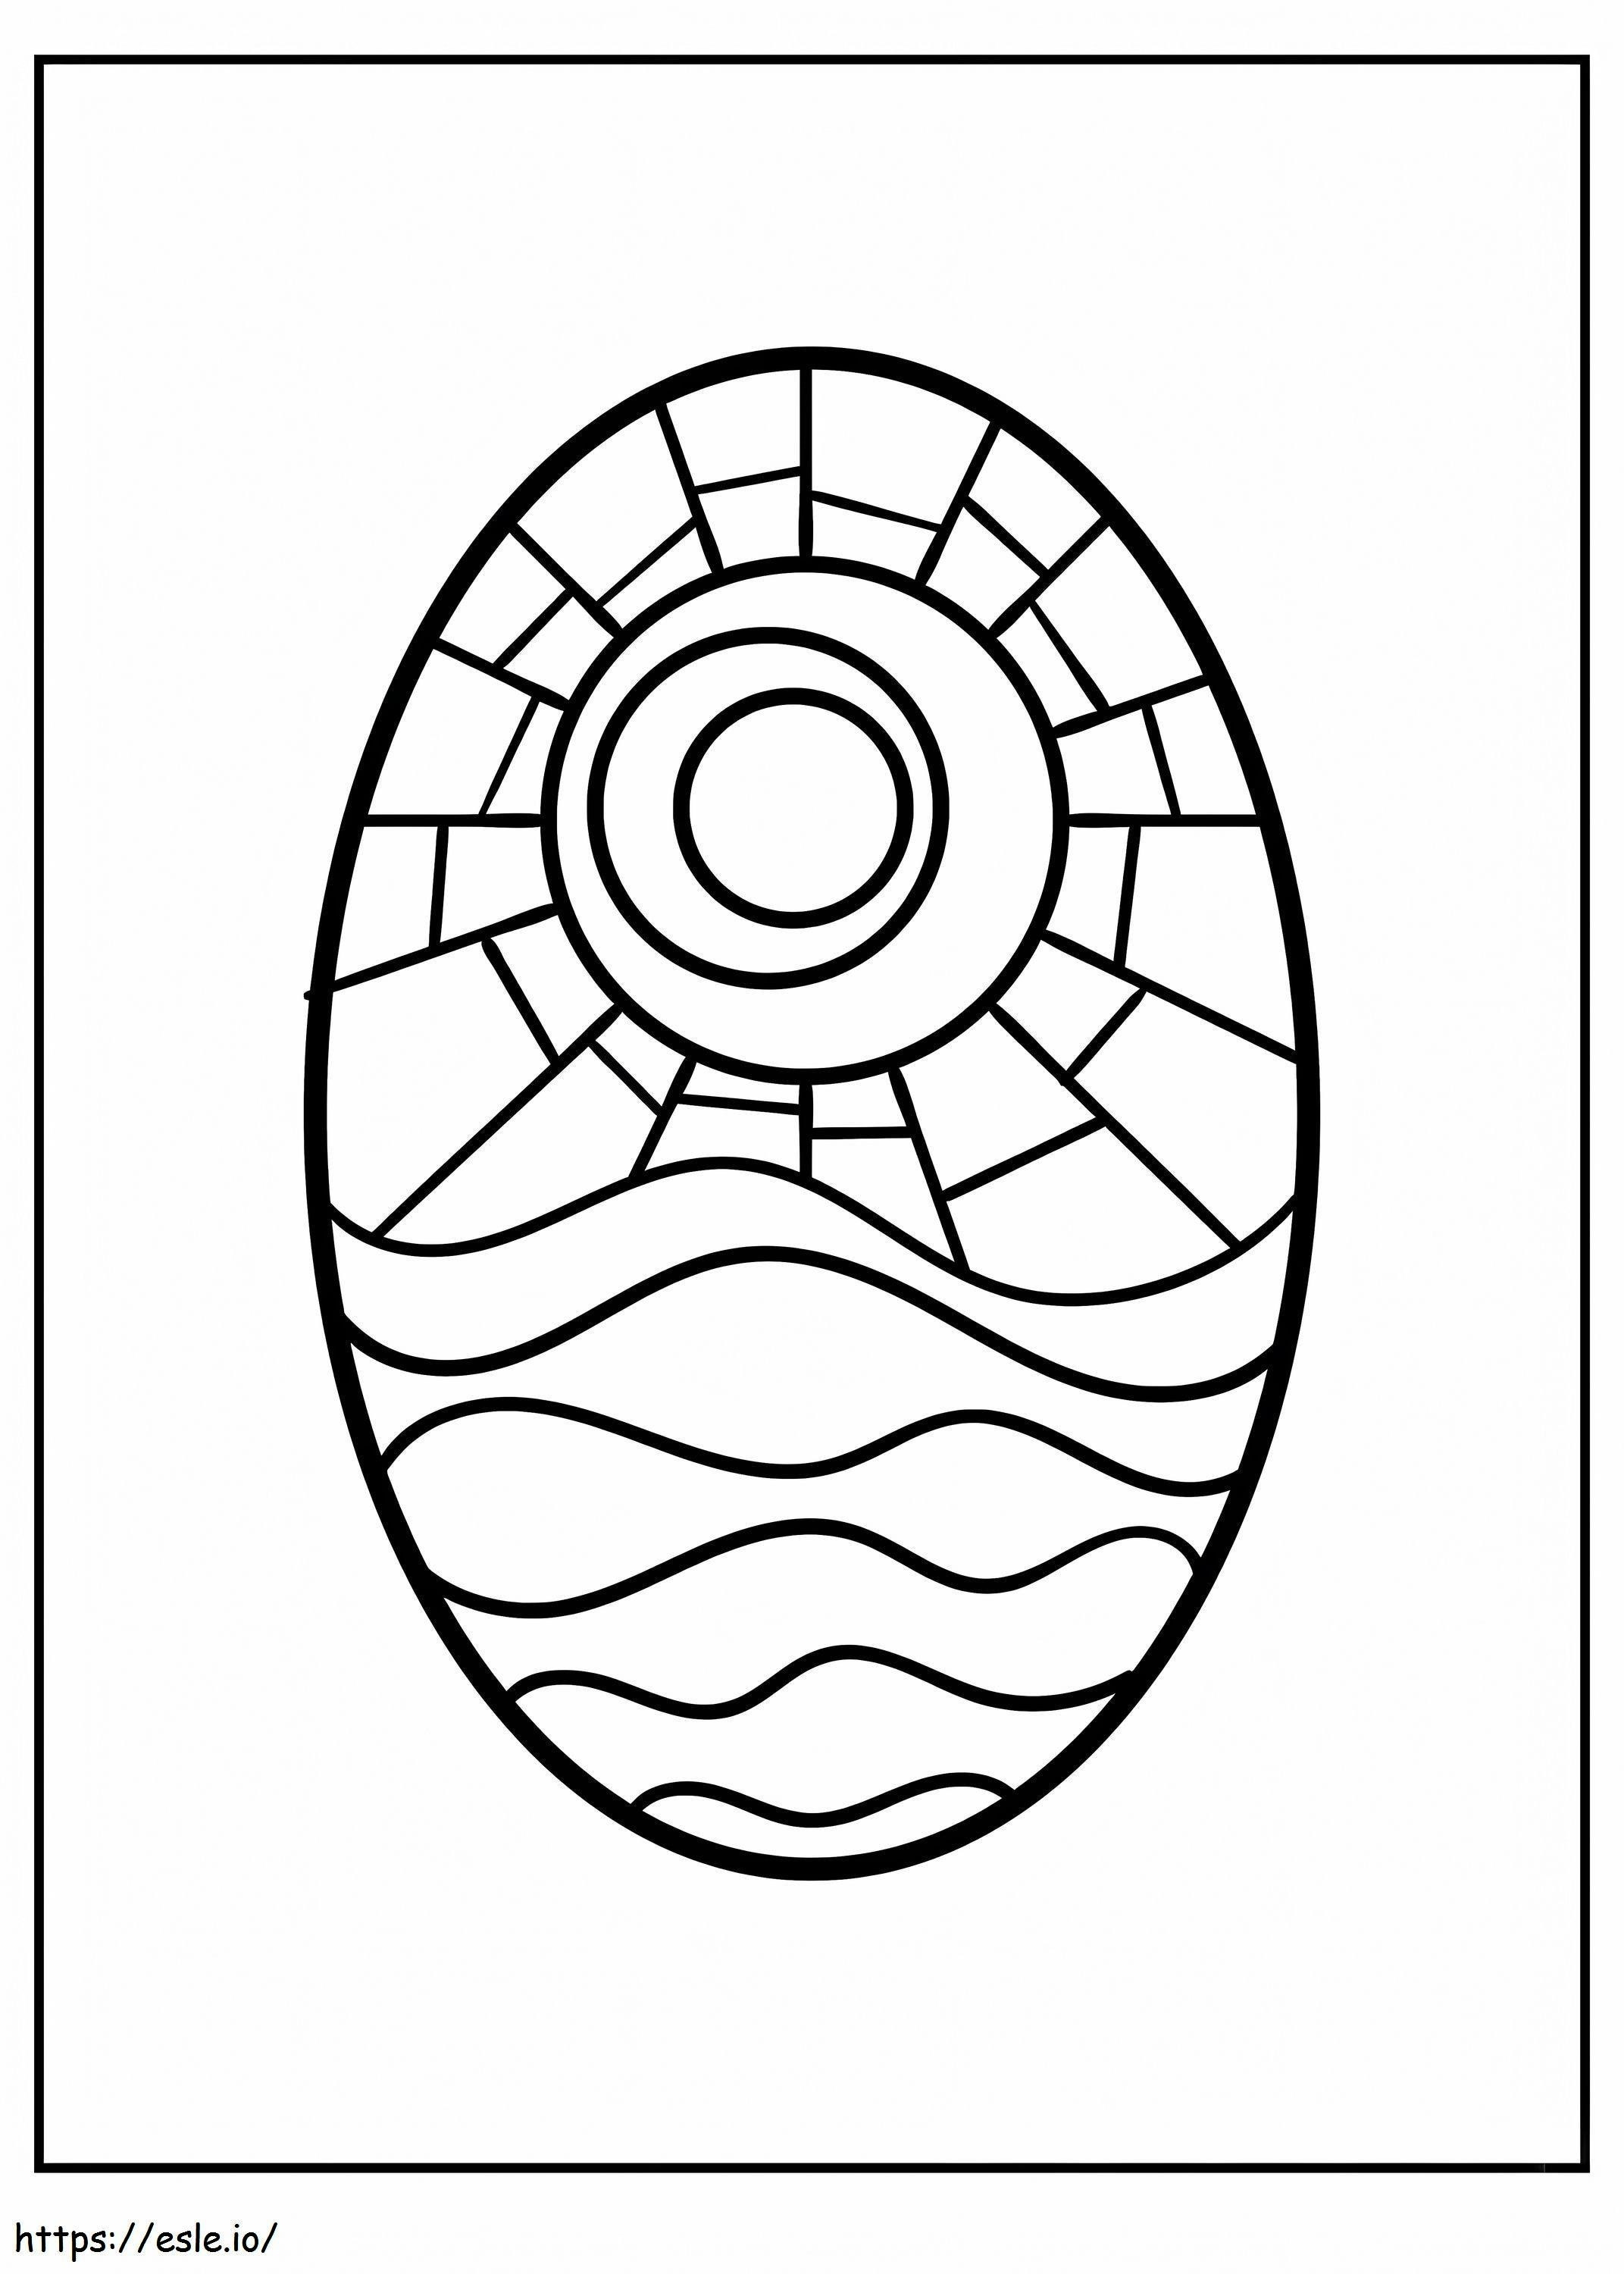 Stained Glass coloring page